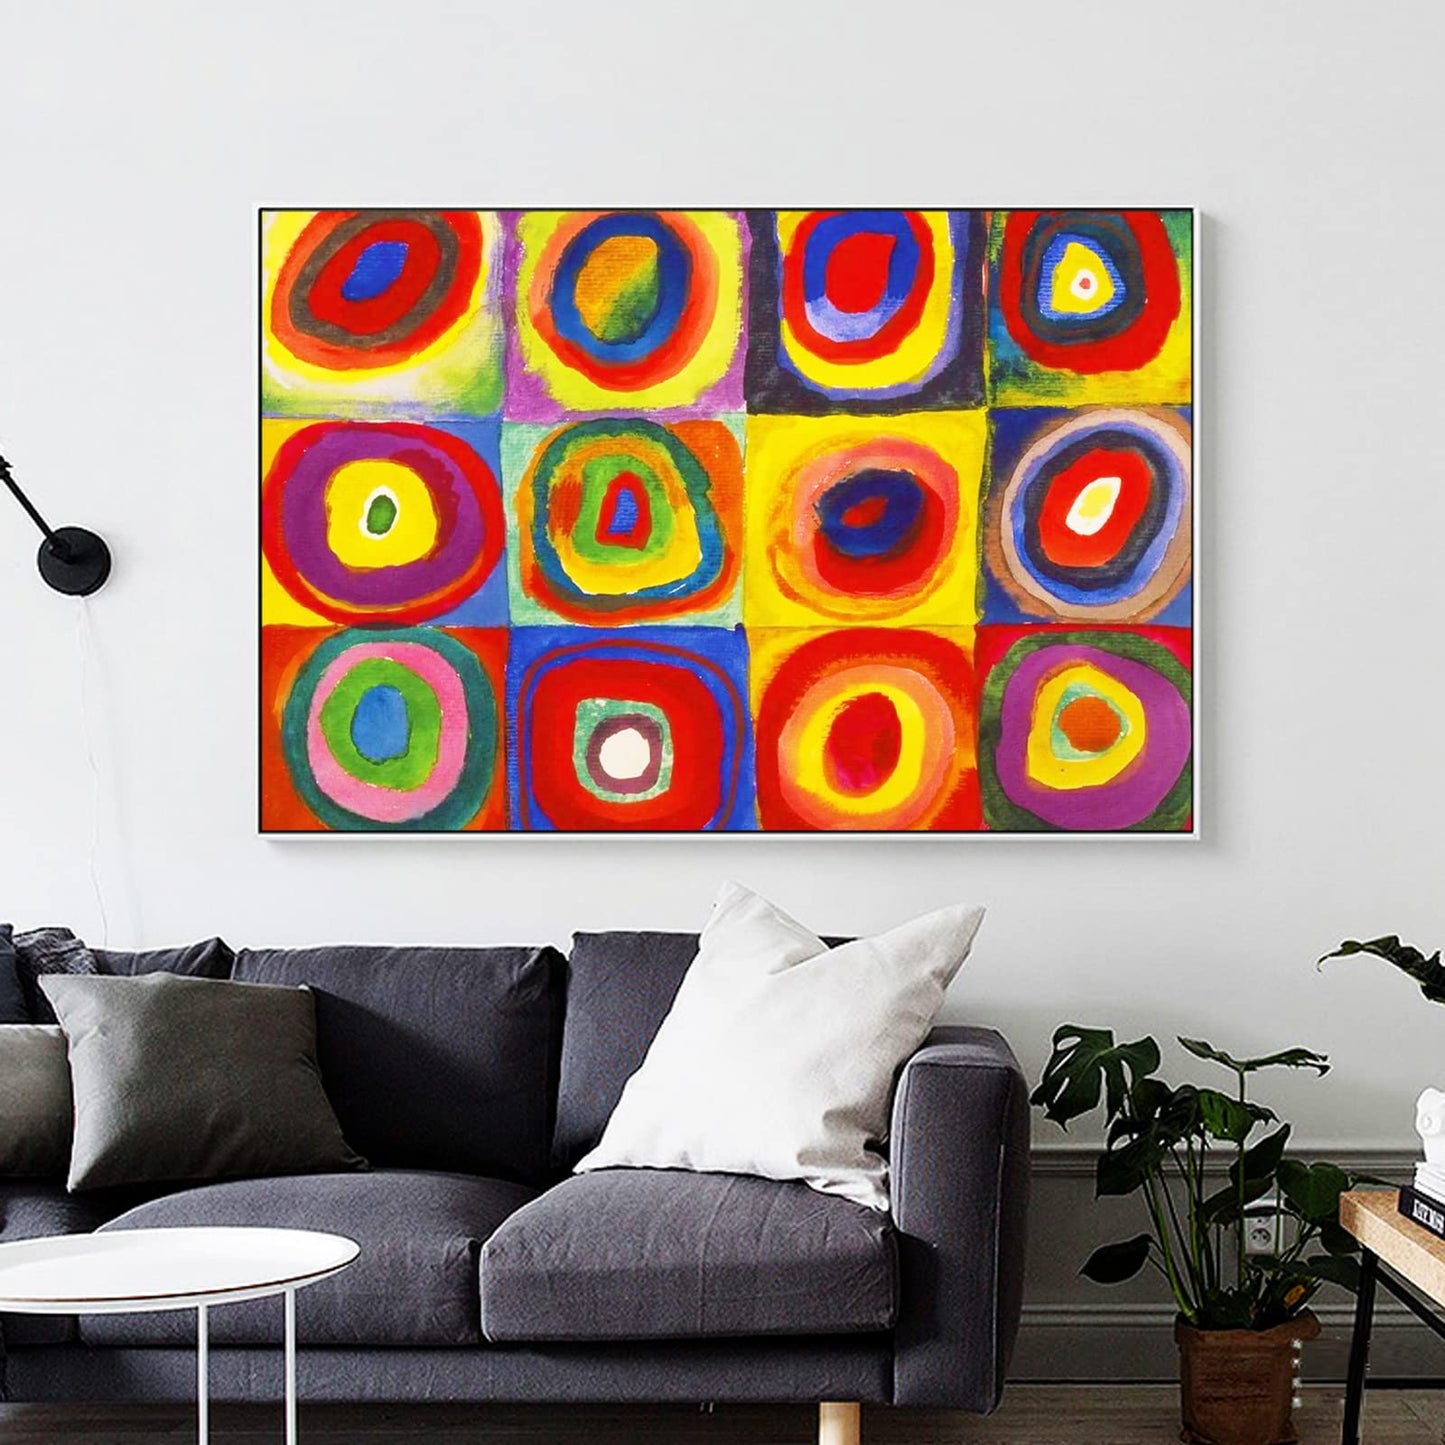 Wassily Kandinsky Wall Art - Squares with Concentric Circles Poster - Fine Art Prints - Abstract Canvas Wall Art Colorful Painting for Living Room Bedroom Home Decor Unframed (12x16in/30x40cm)